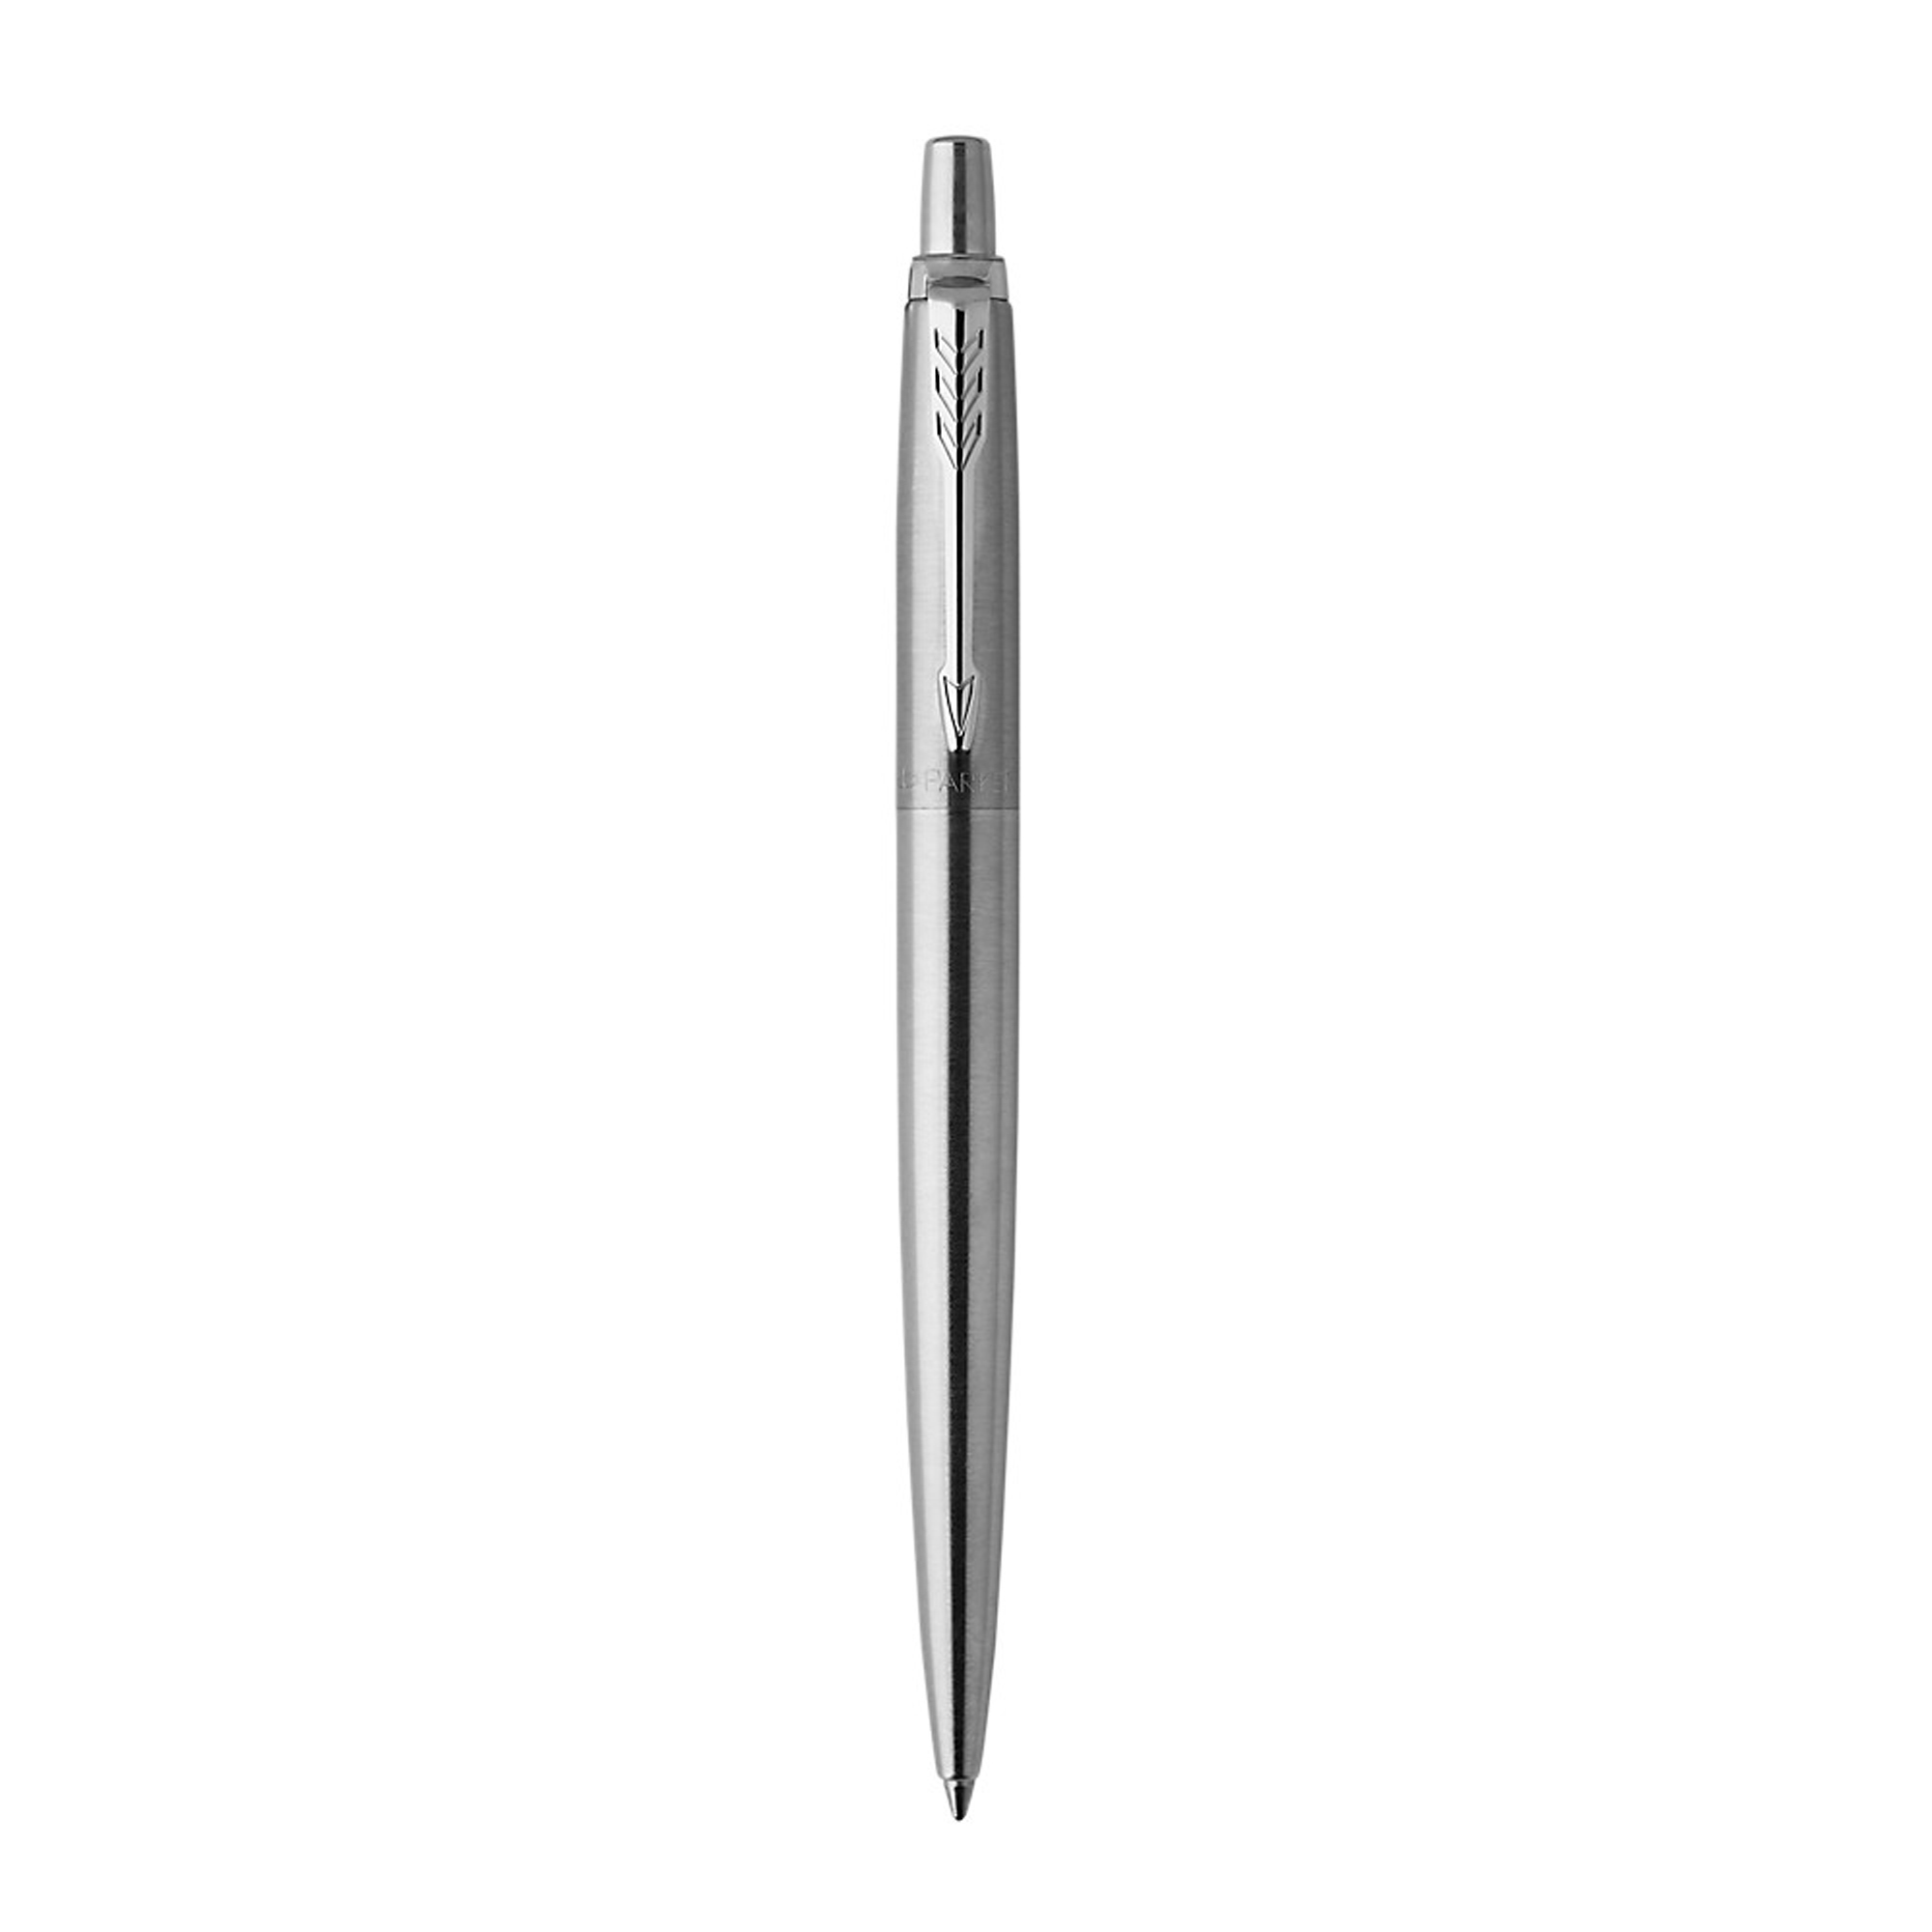 Penna a Sfera Parker Jotter Stainless Steel Ct Fusto in Acciaio 1953170 3501179531700